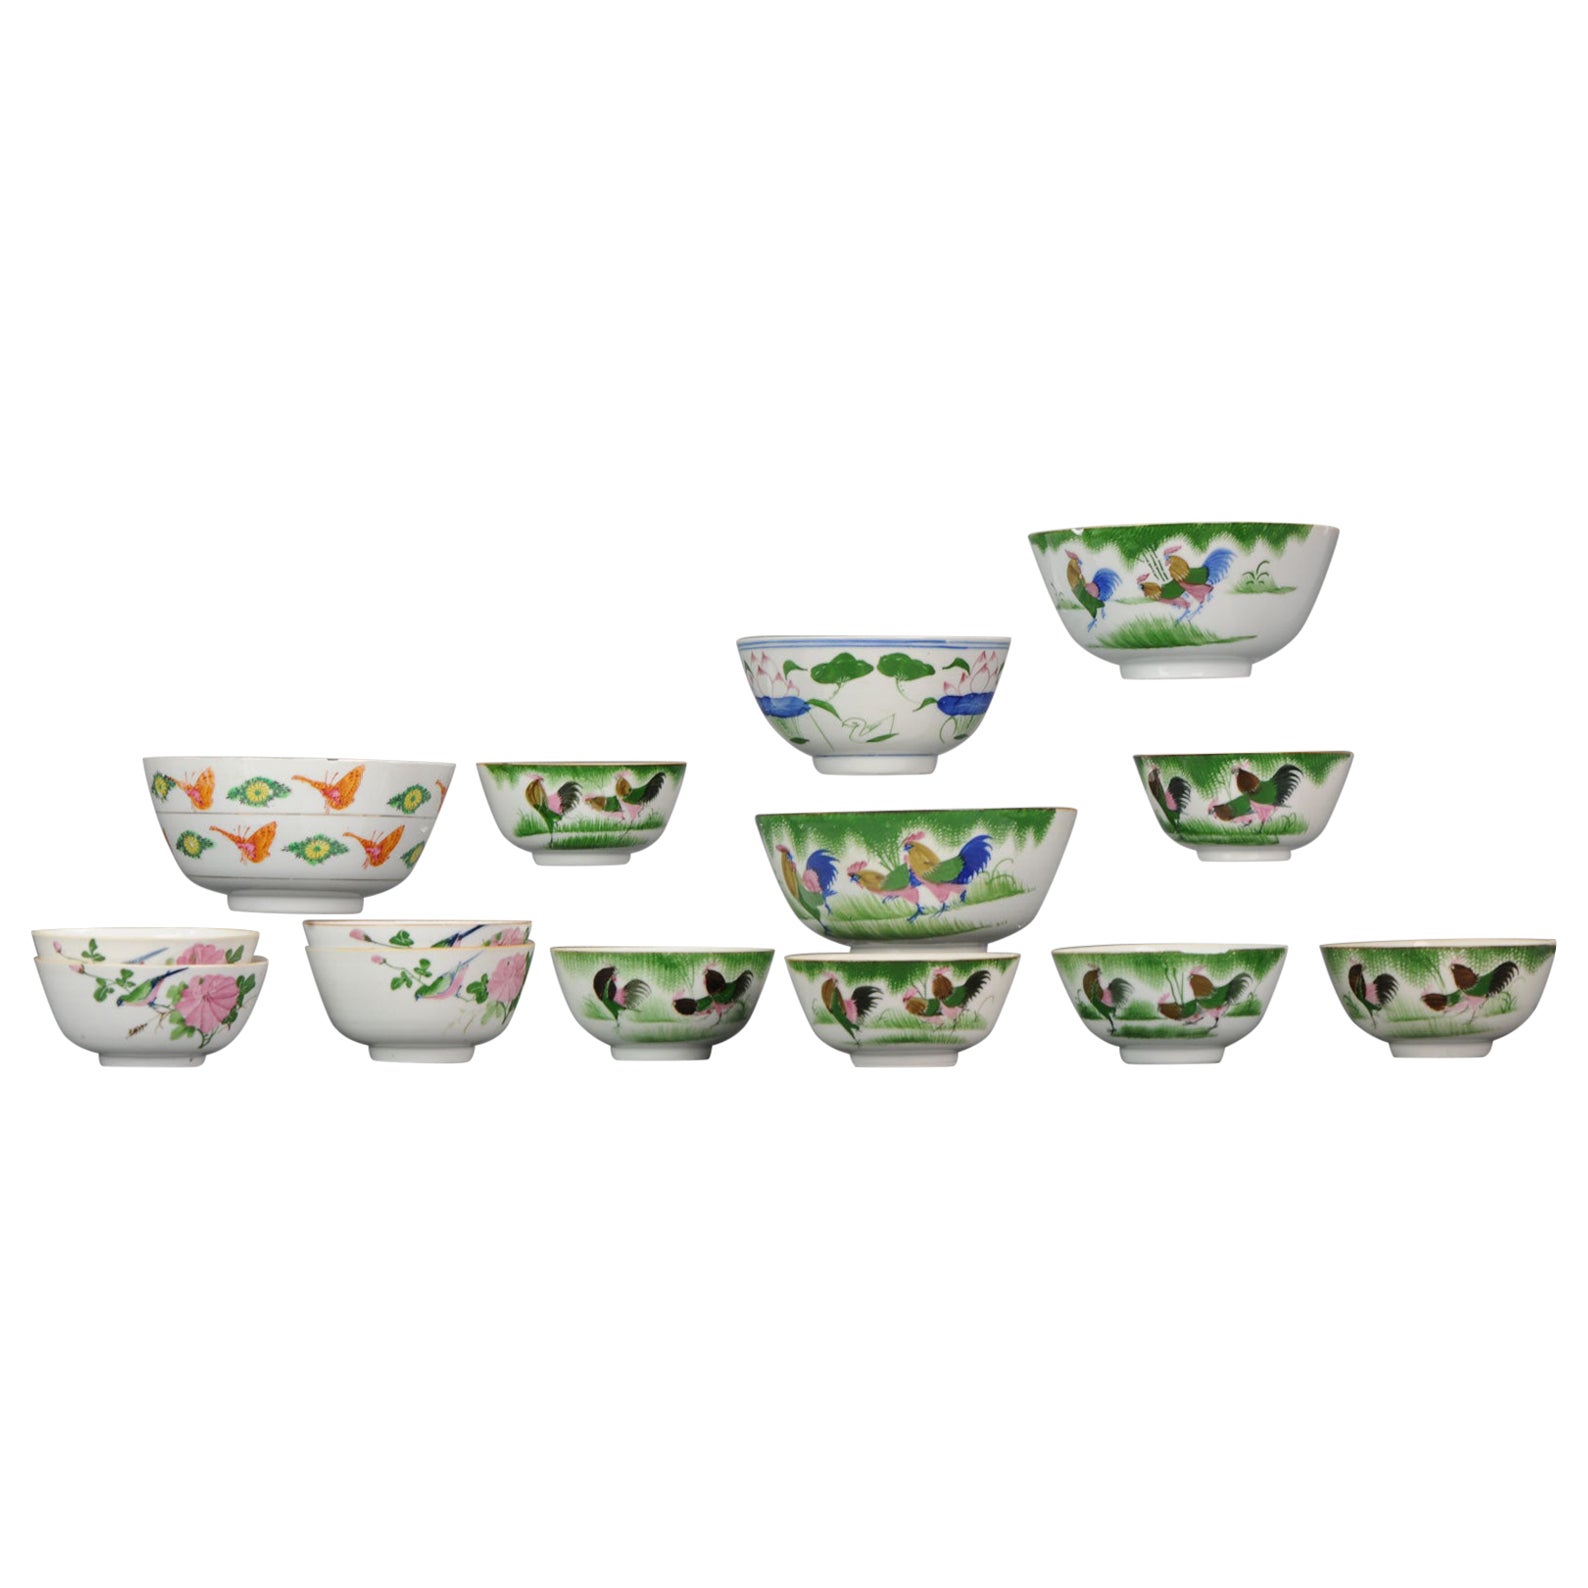 Set of 12 Lovely Chinese Proc Bowls with Roosters & Birds Chinese Porcelain For Sale